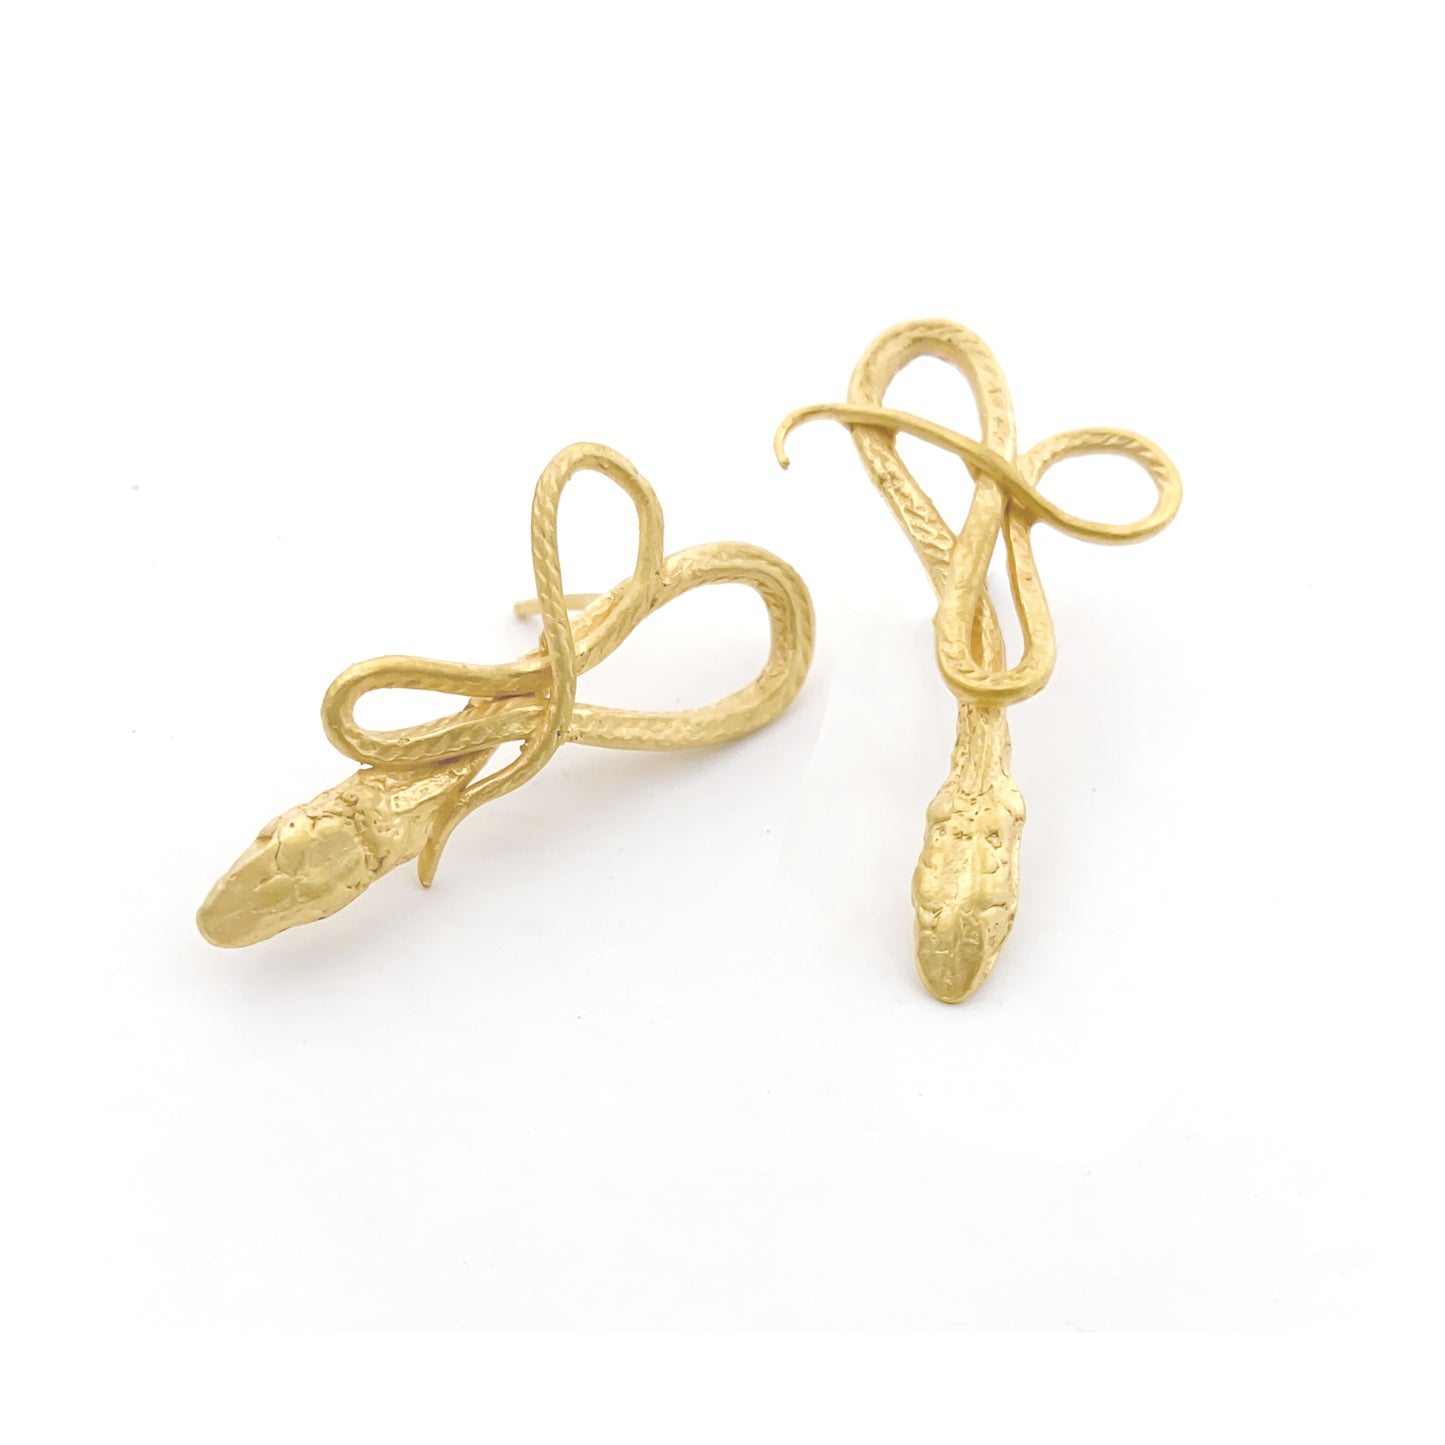 Small Gold Serpentine Earrings